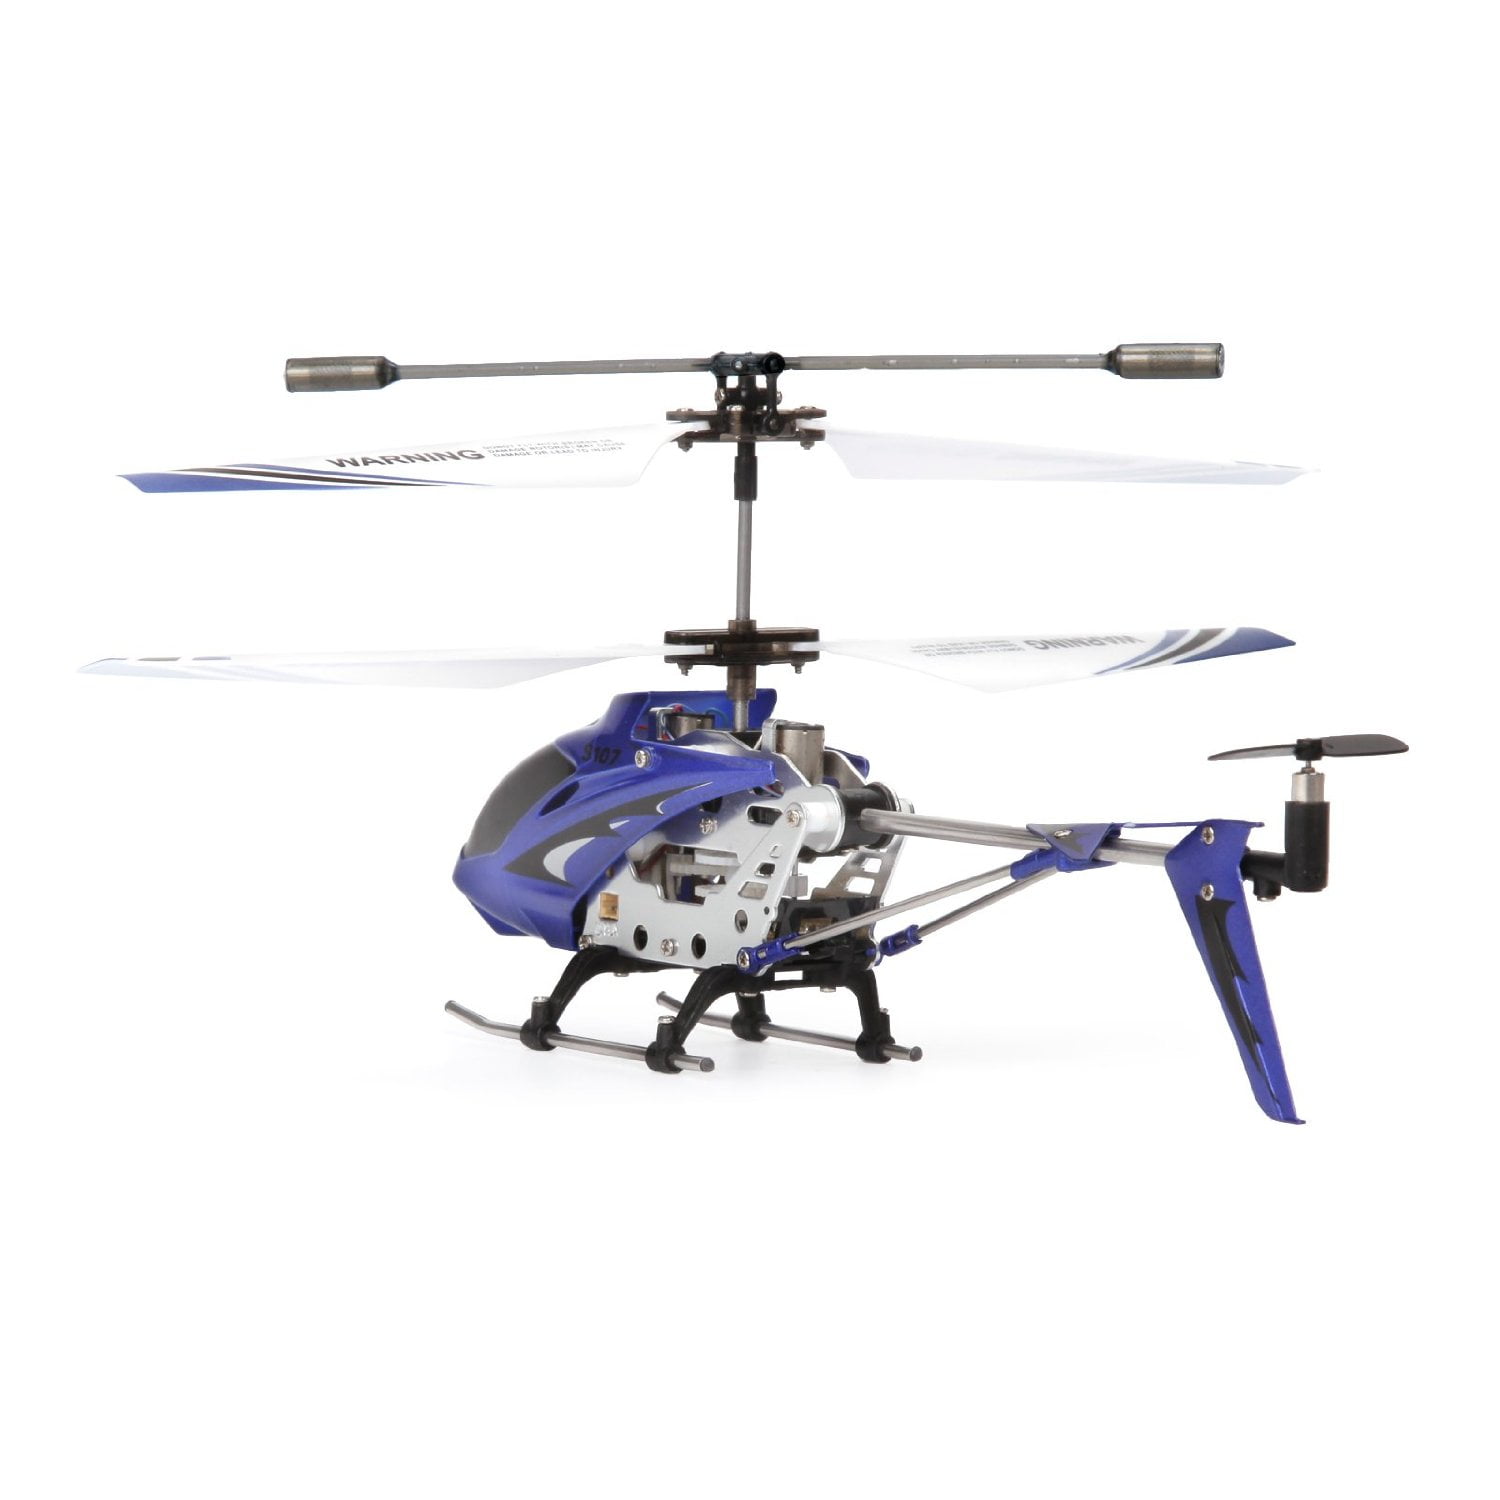 s107g rc helicopter